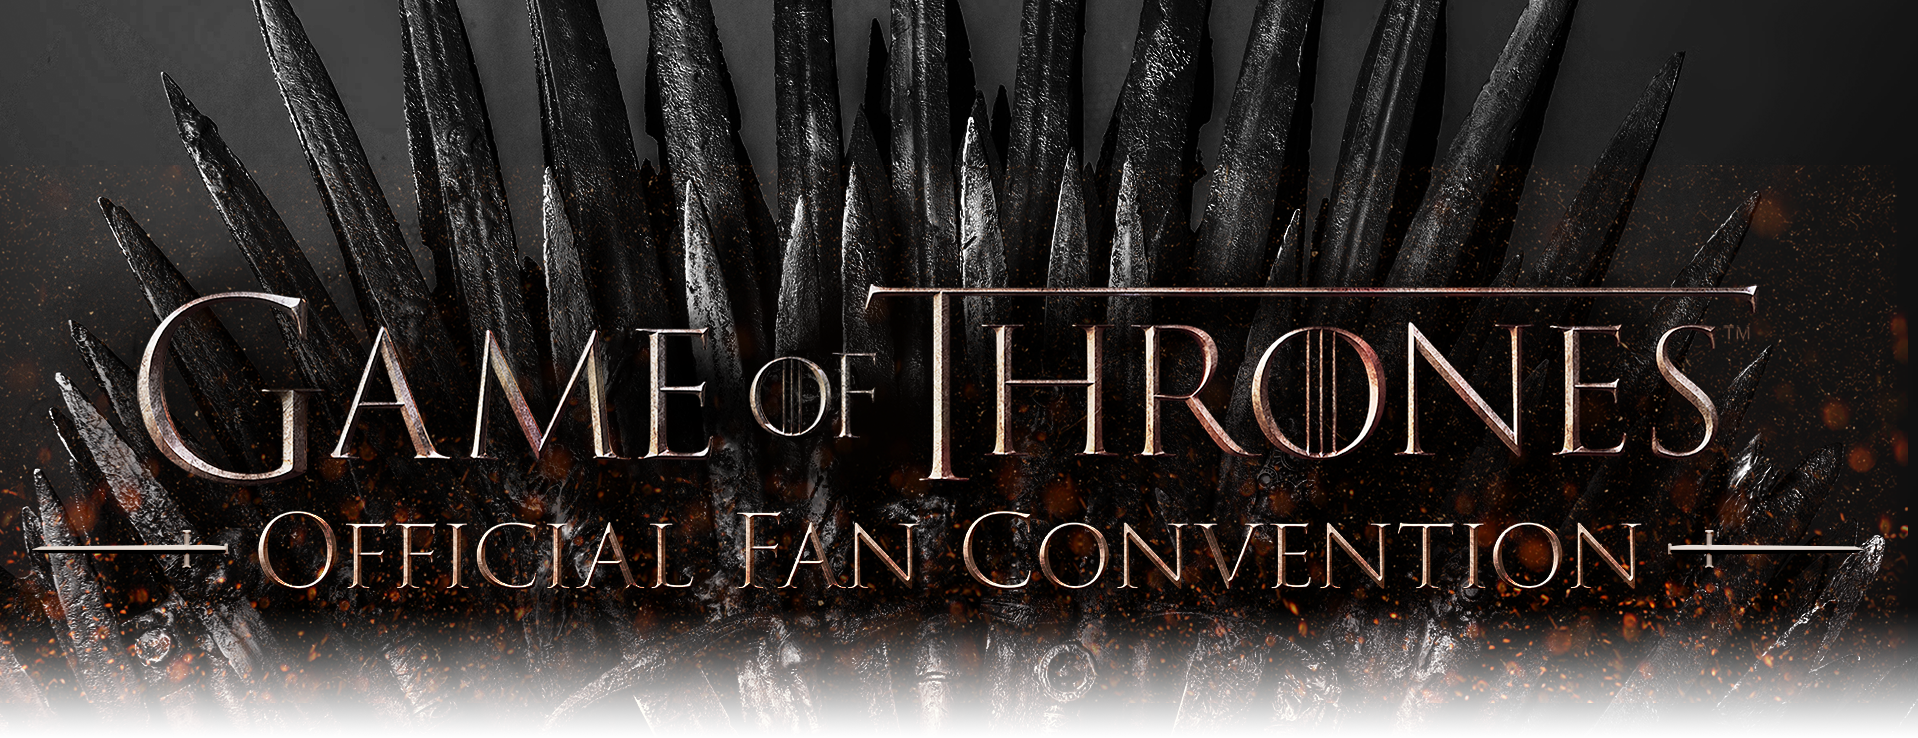 Game of Thrones - Official Fan Convention